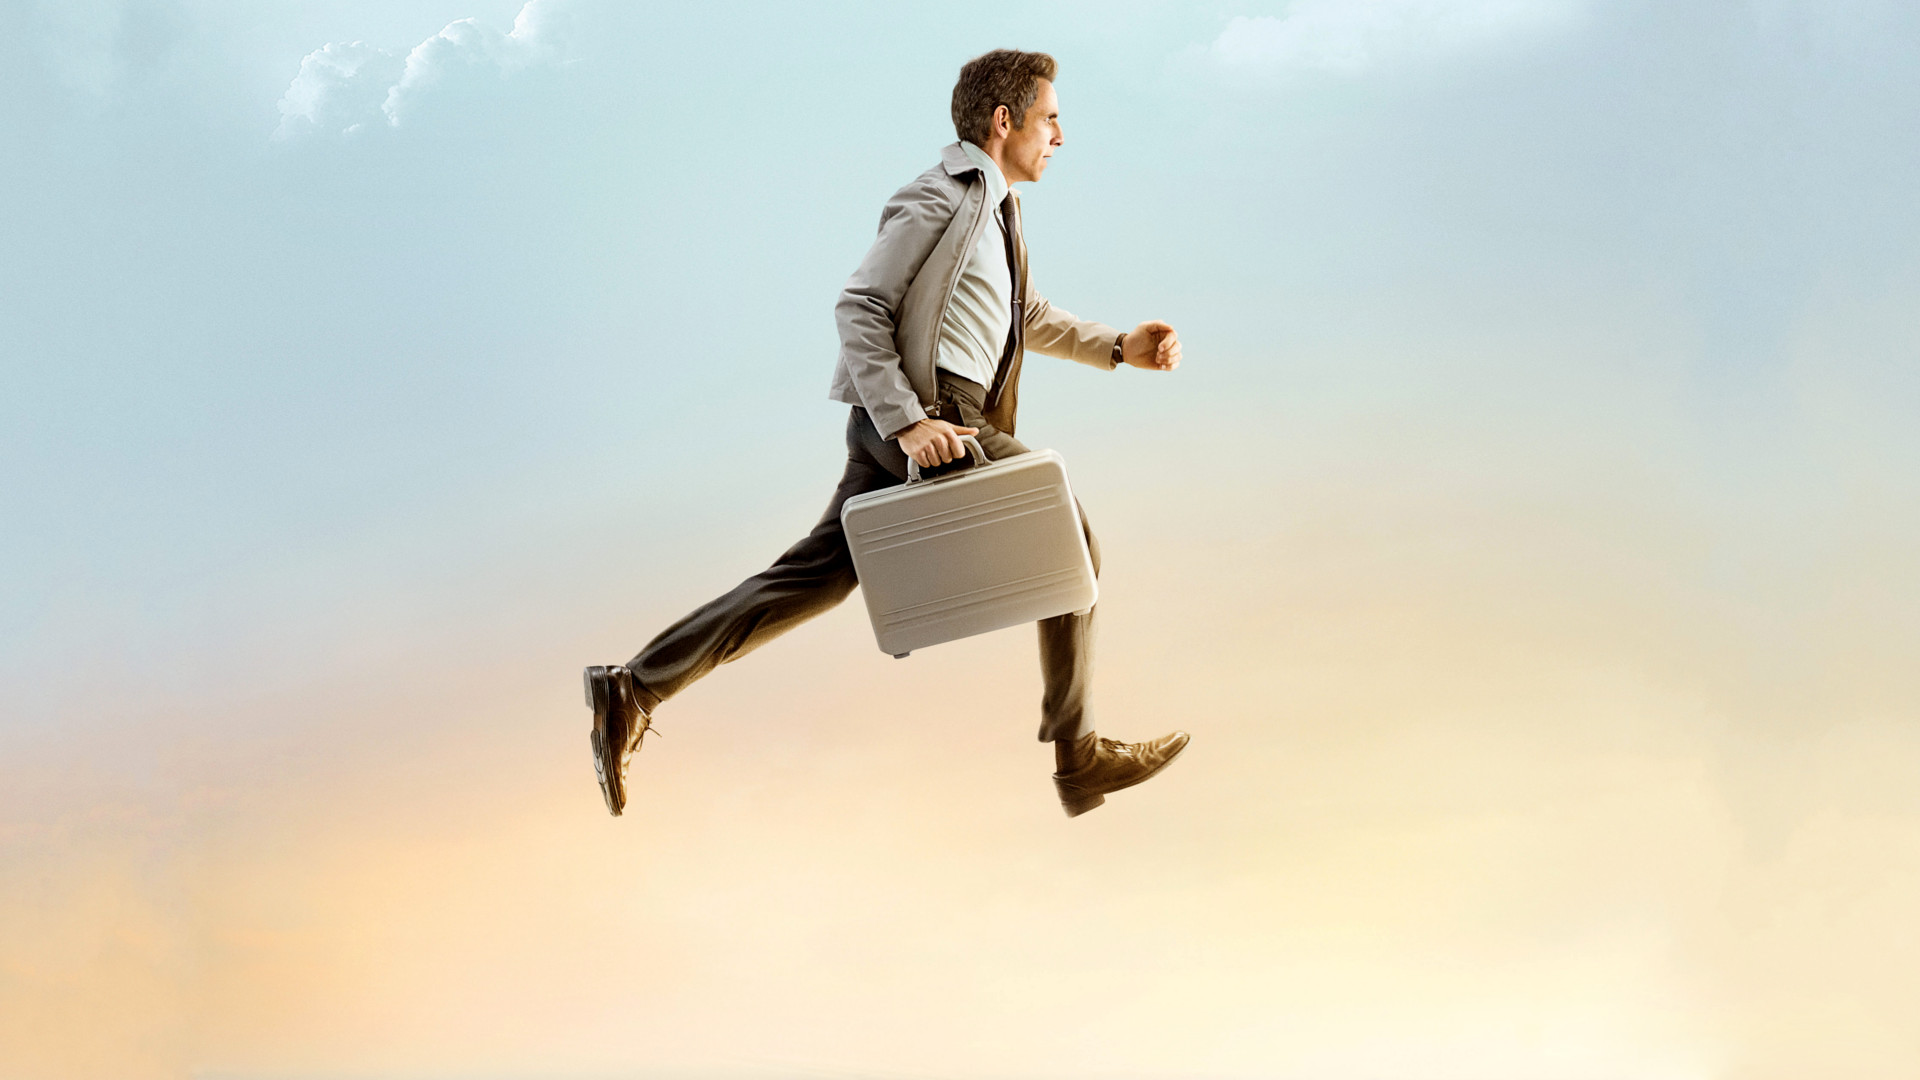 Movie The Secret Life of Walter Mitty HD Wallpaper | Background Image